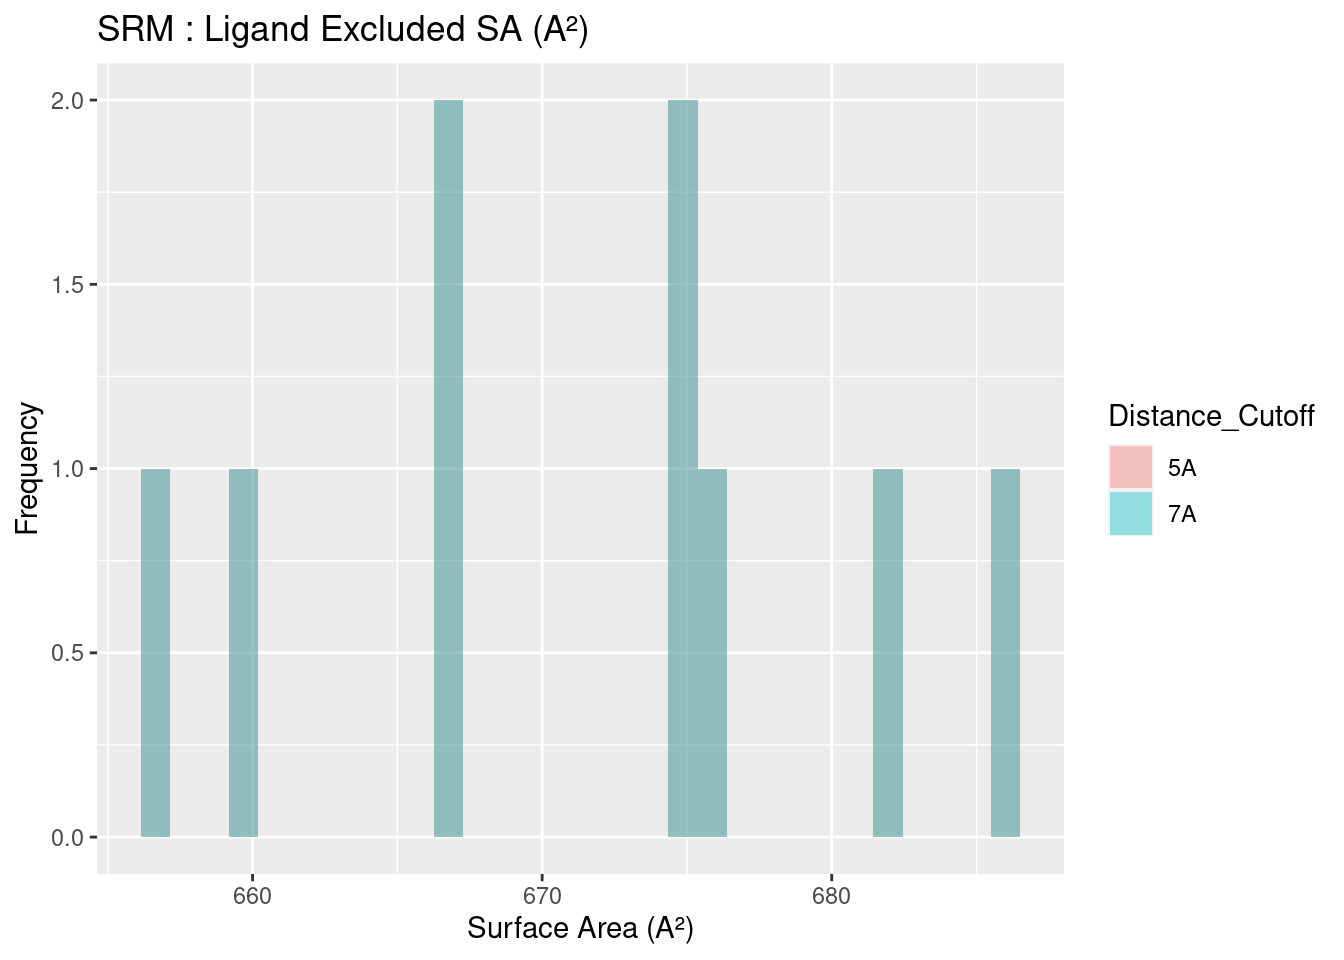 SRM: Ligand Excluded Suface Area